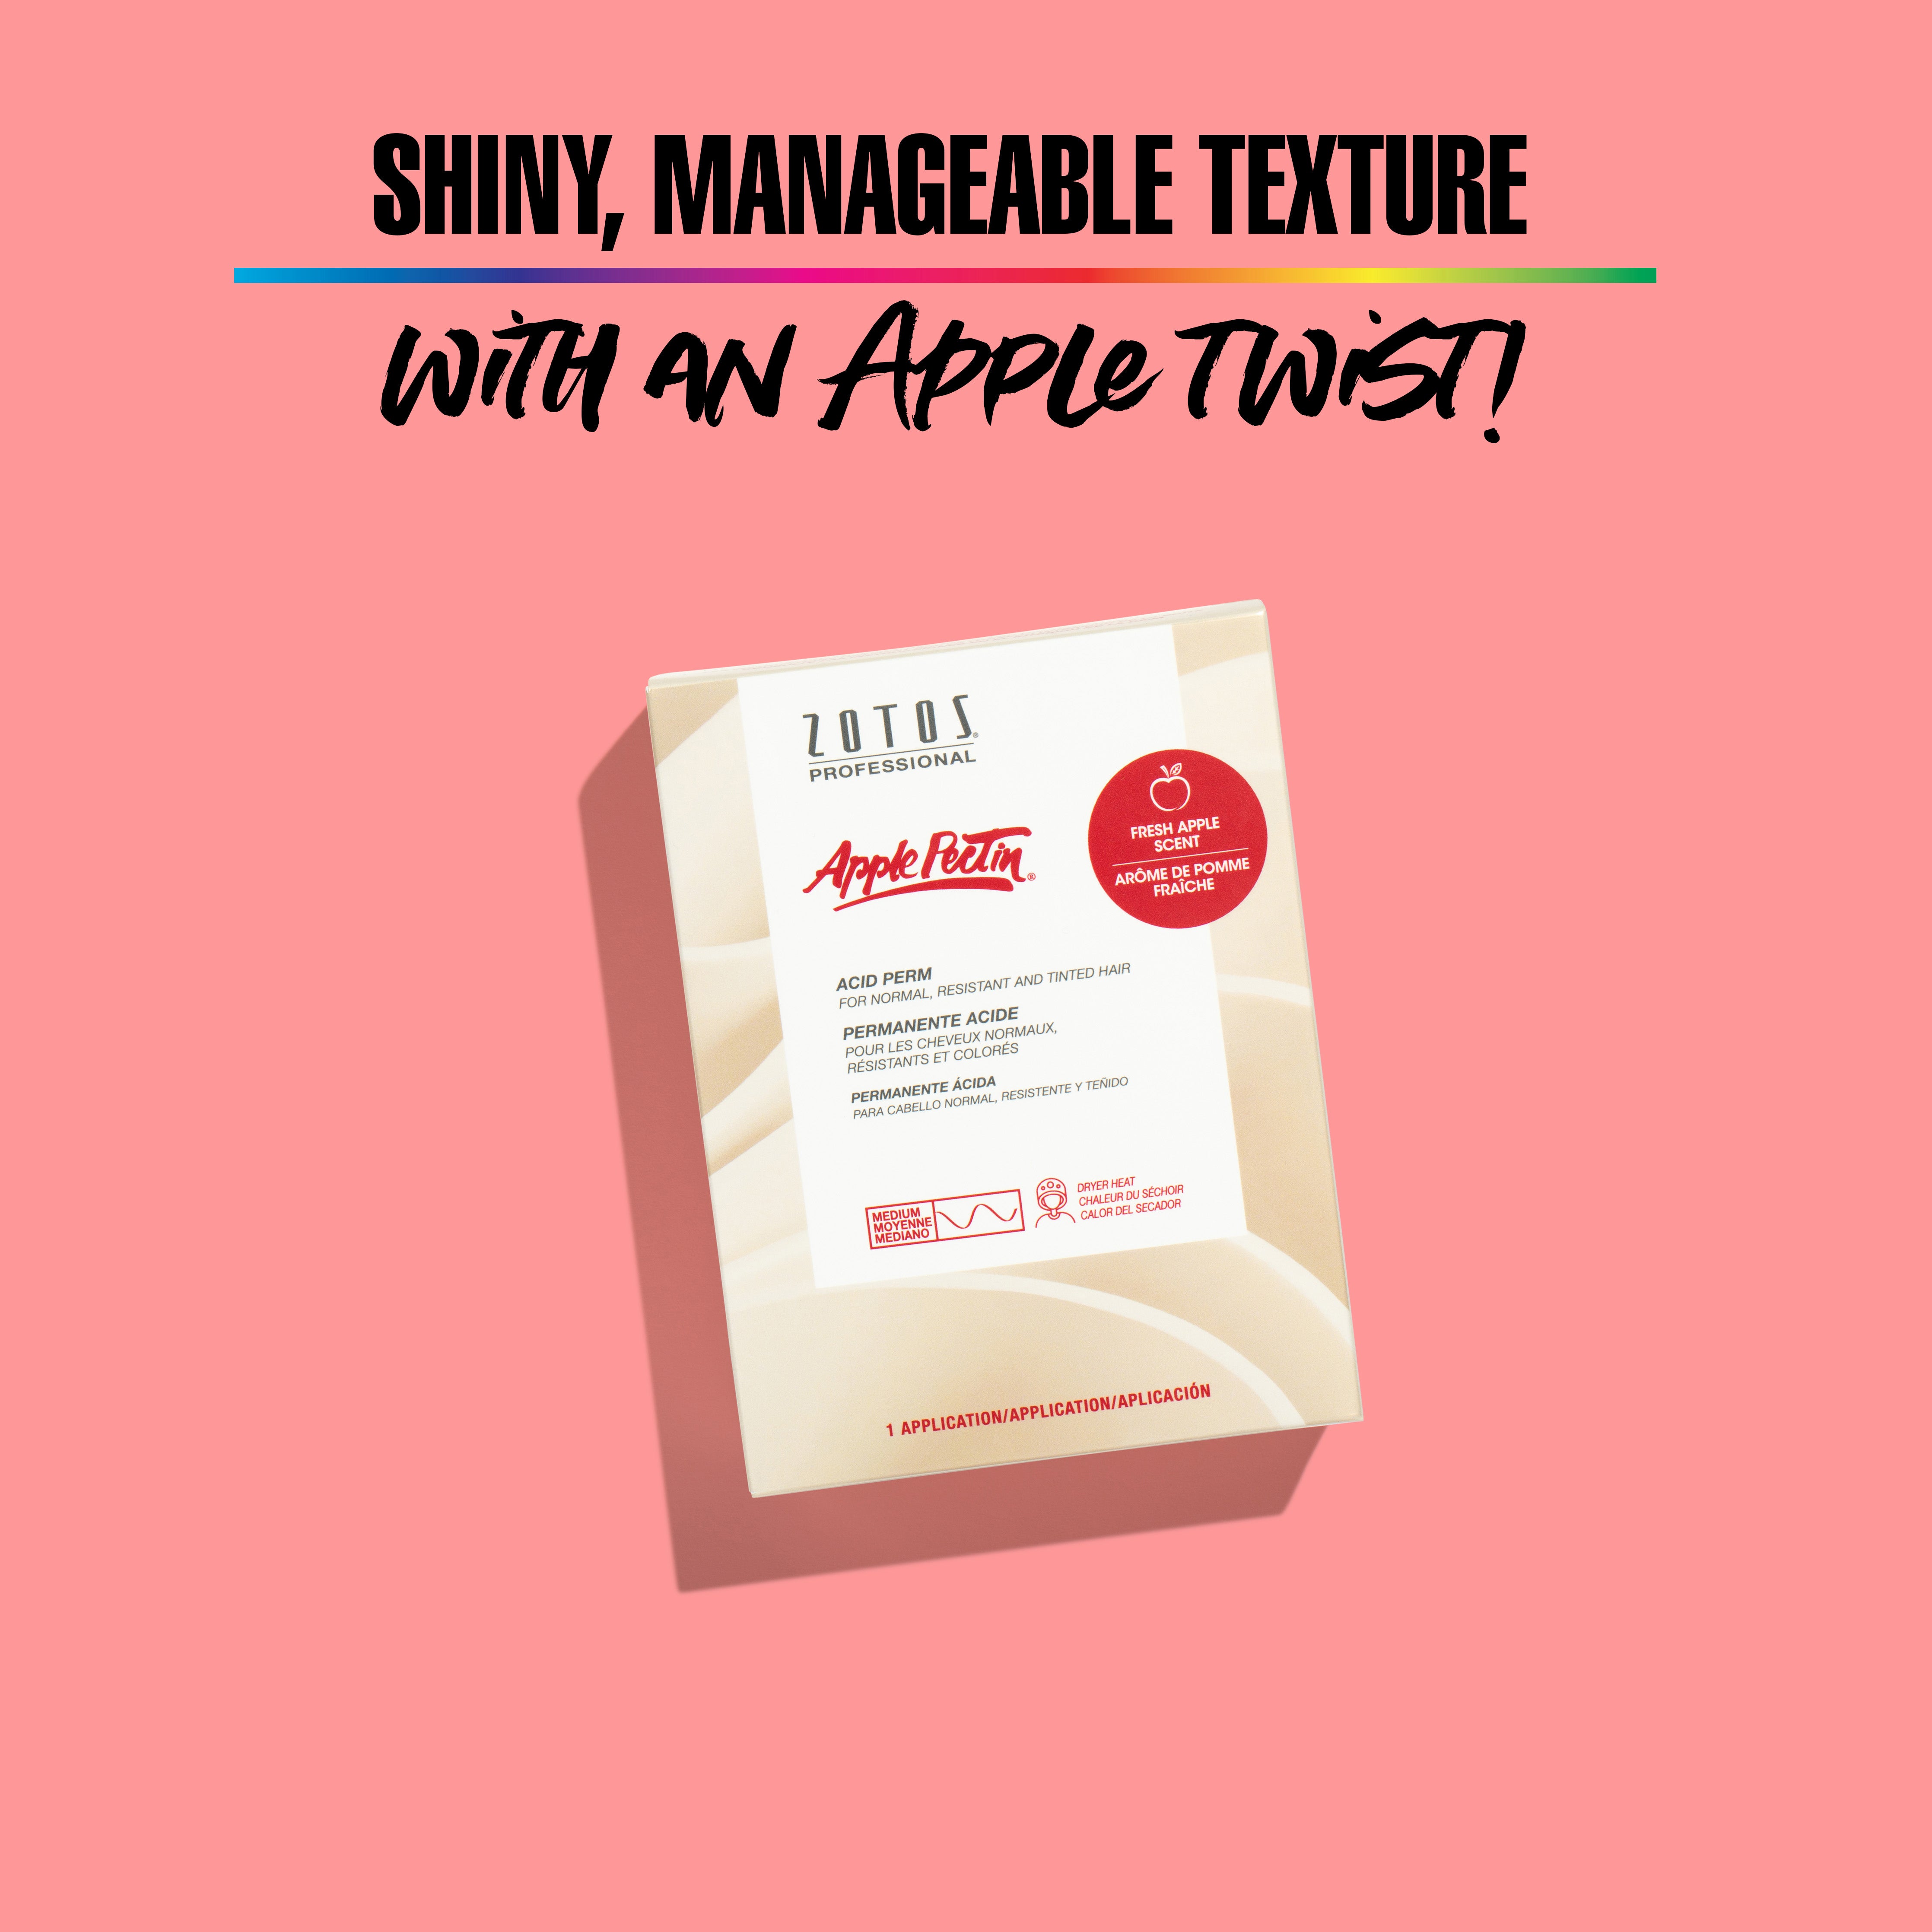 Shiny, manageable texture with an apple twist!